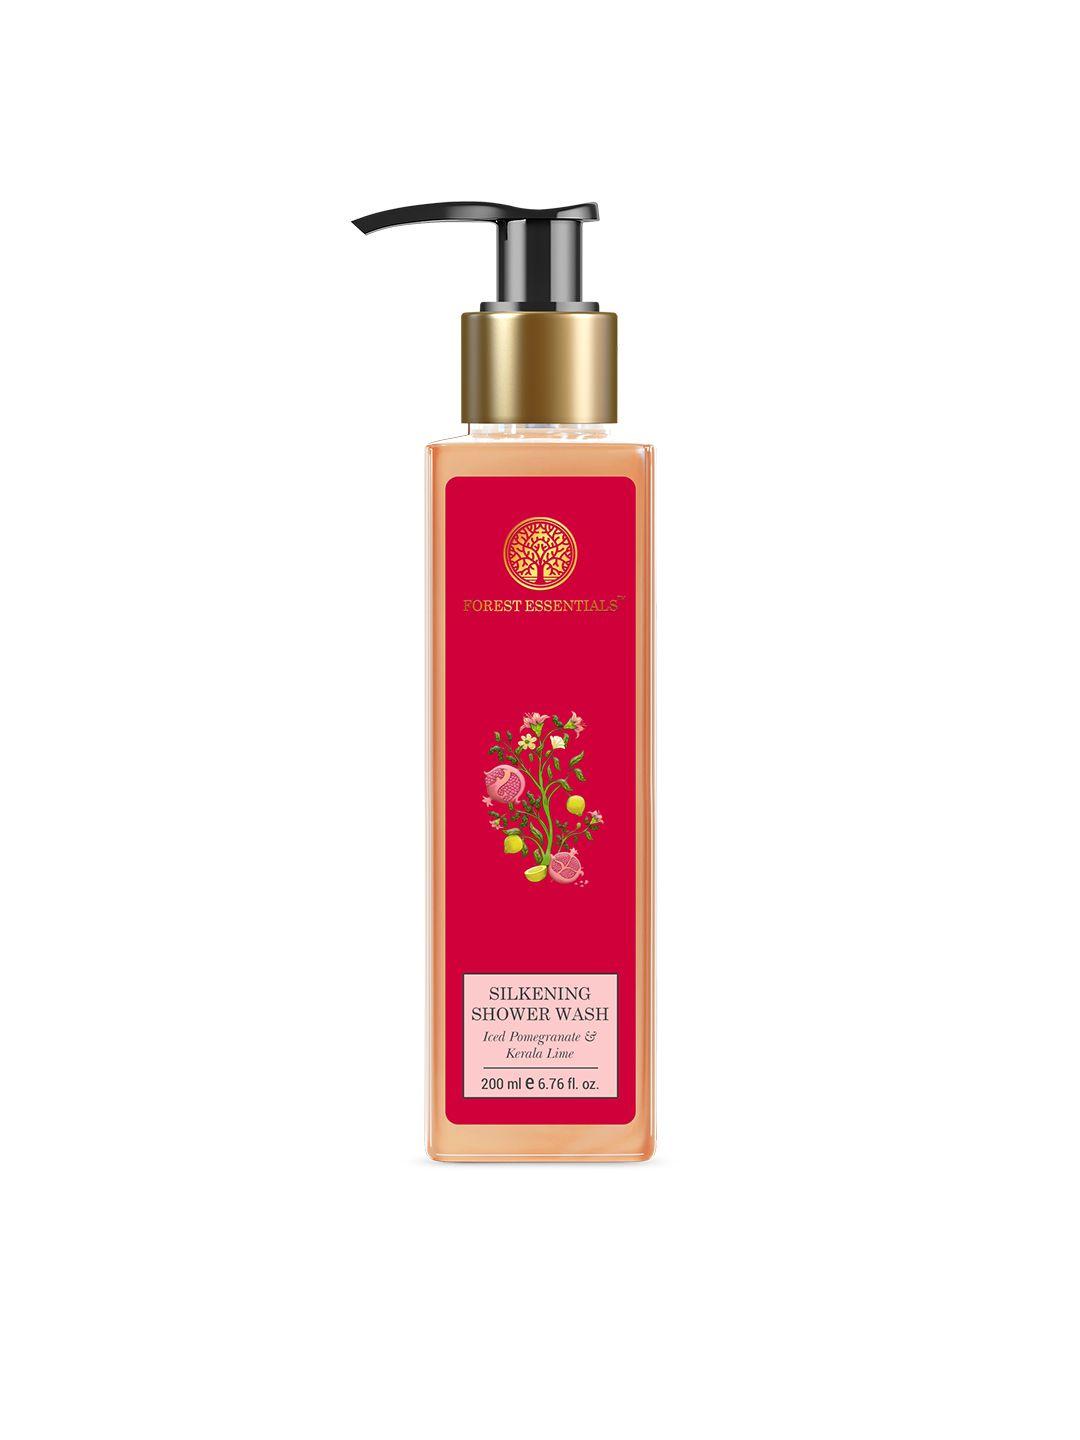 forest essentials silkening shower wash with iced pomegranate & kerala lime - 200 ml